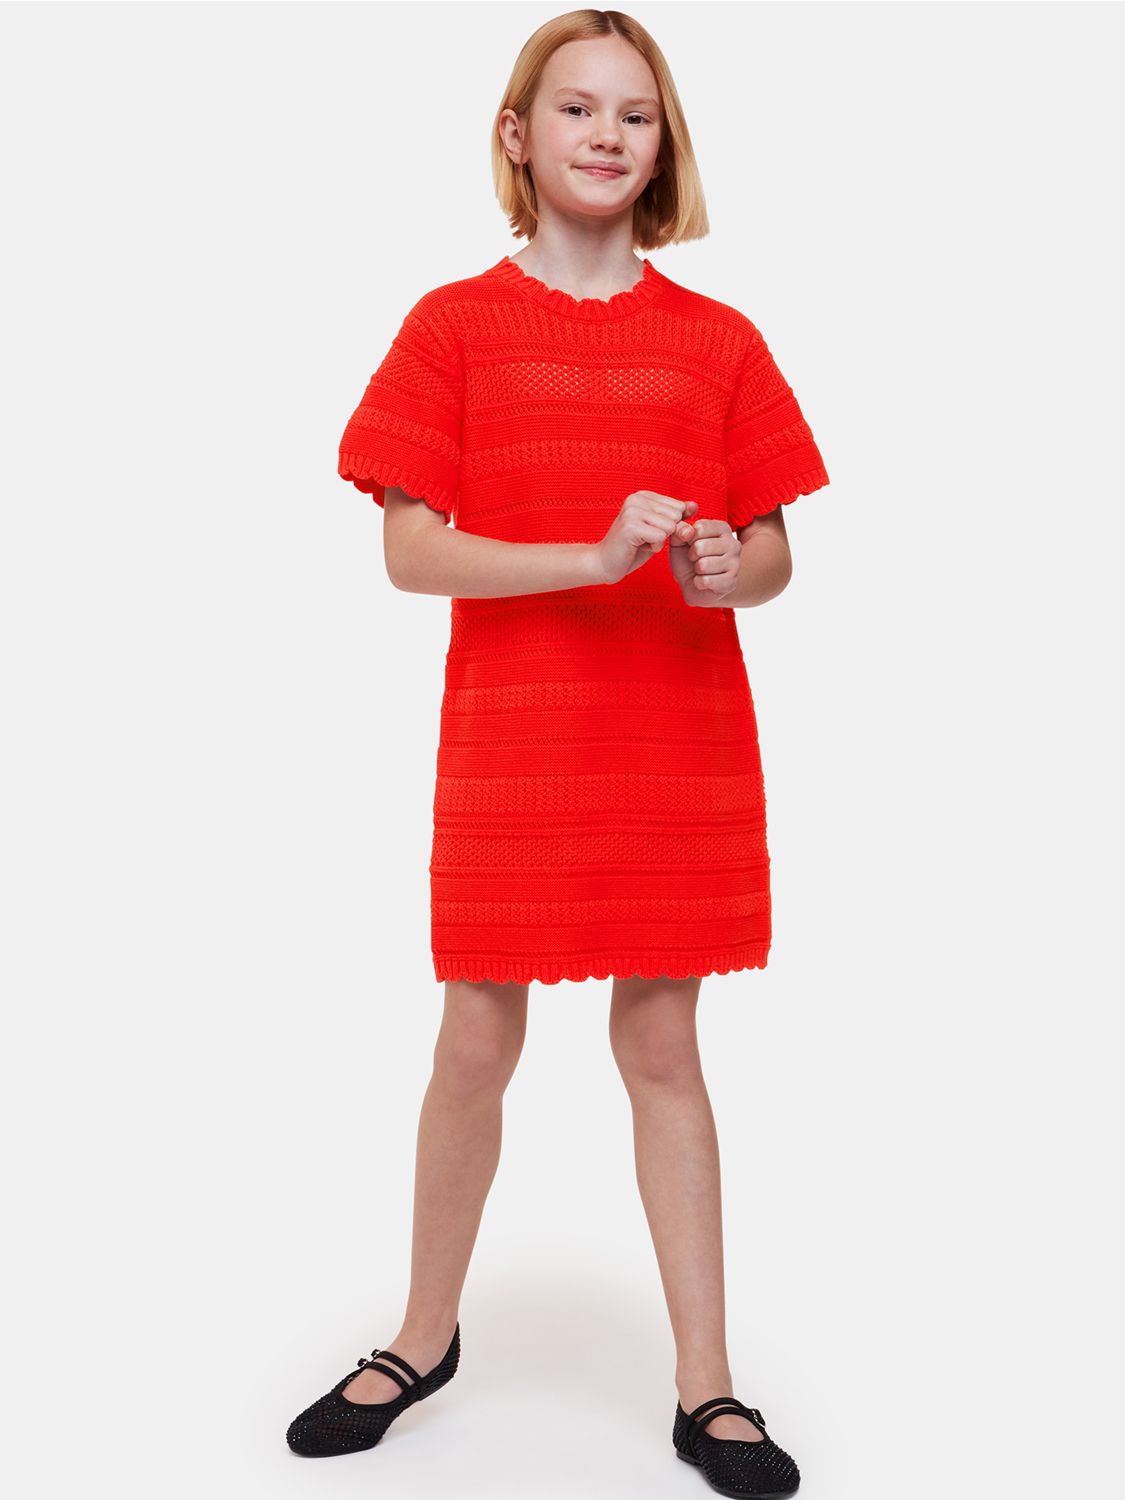 Whistles Kids' Crochet Knit Dress, Red, 3-4 years